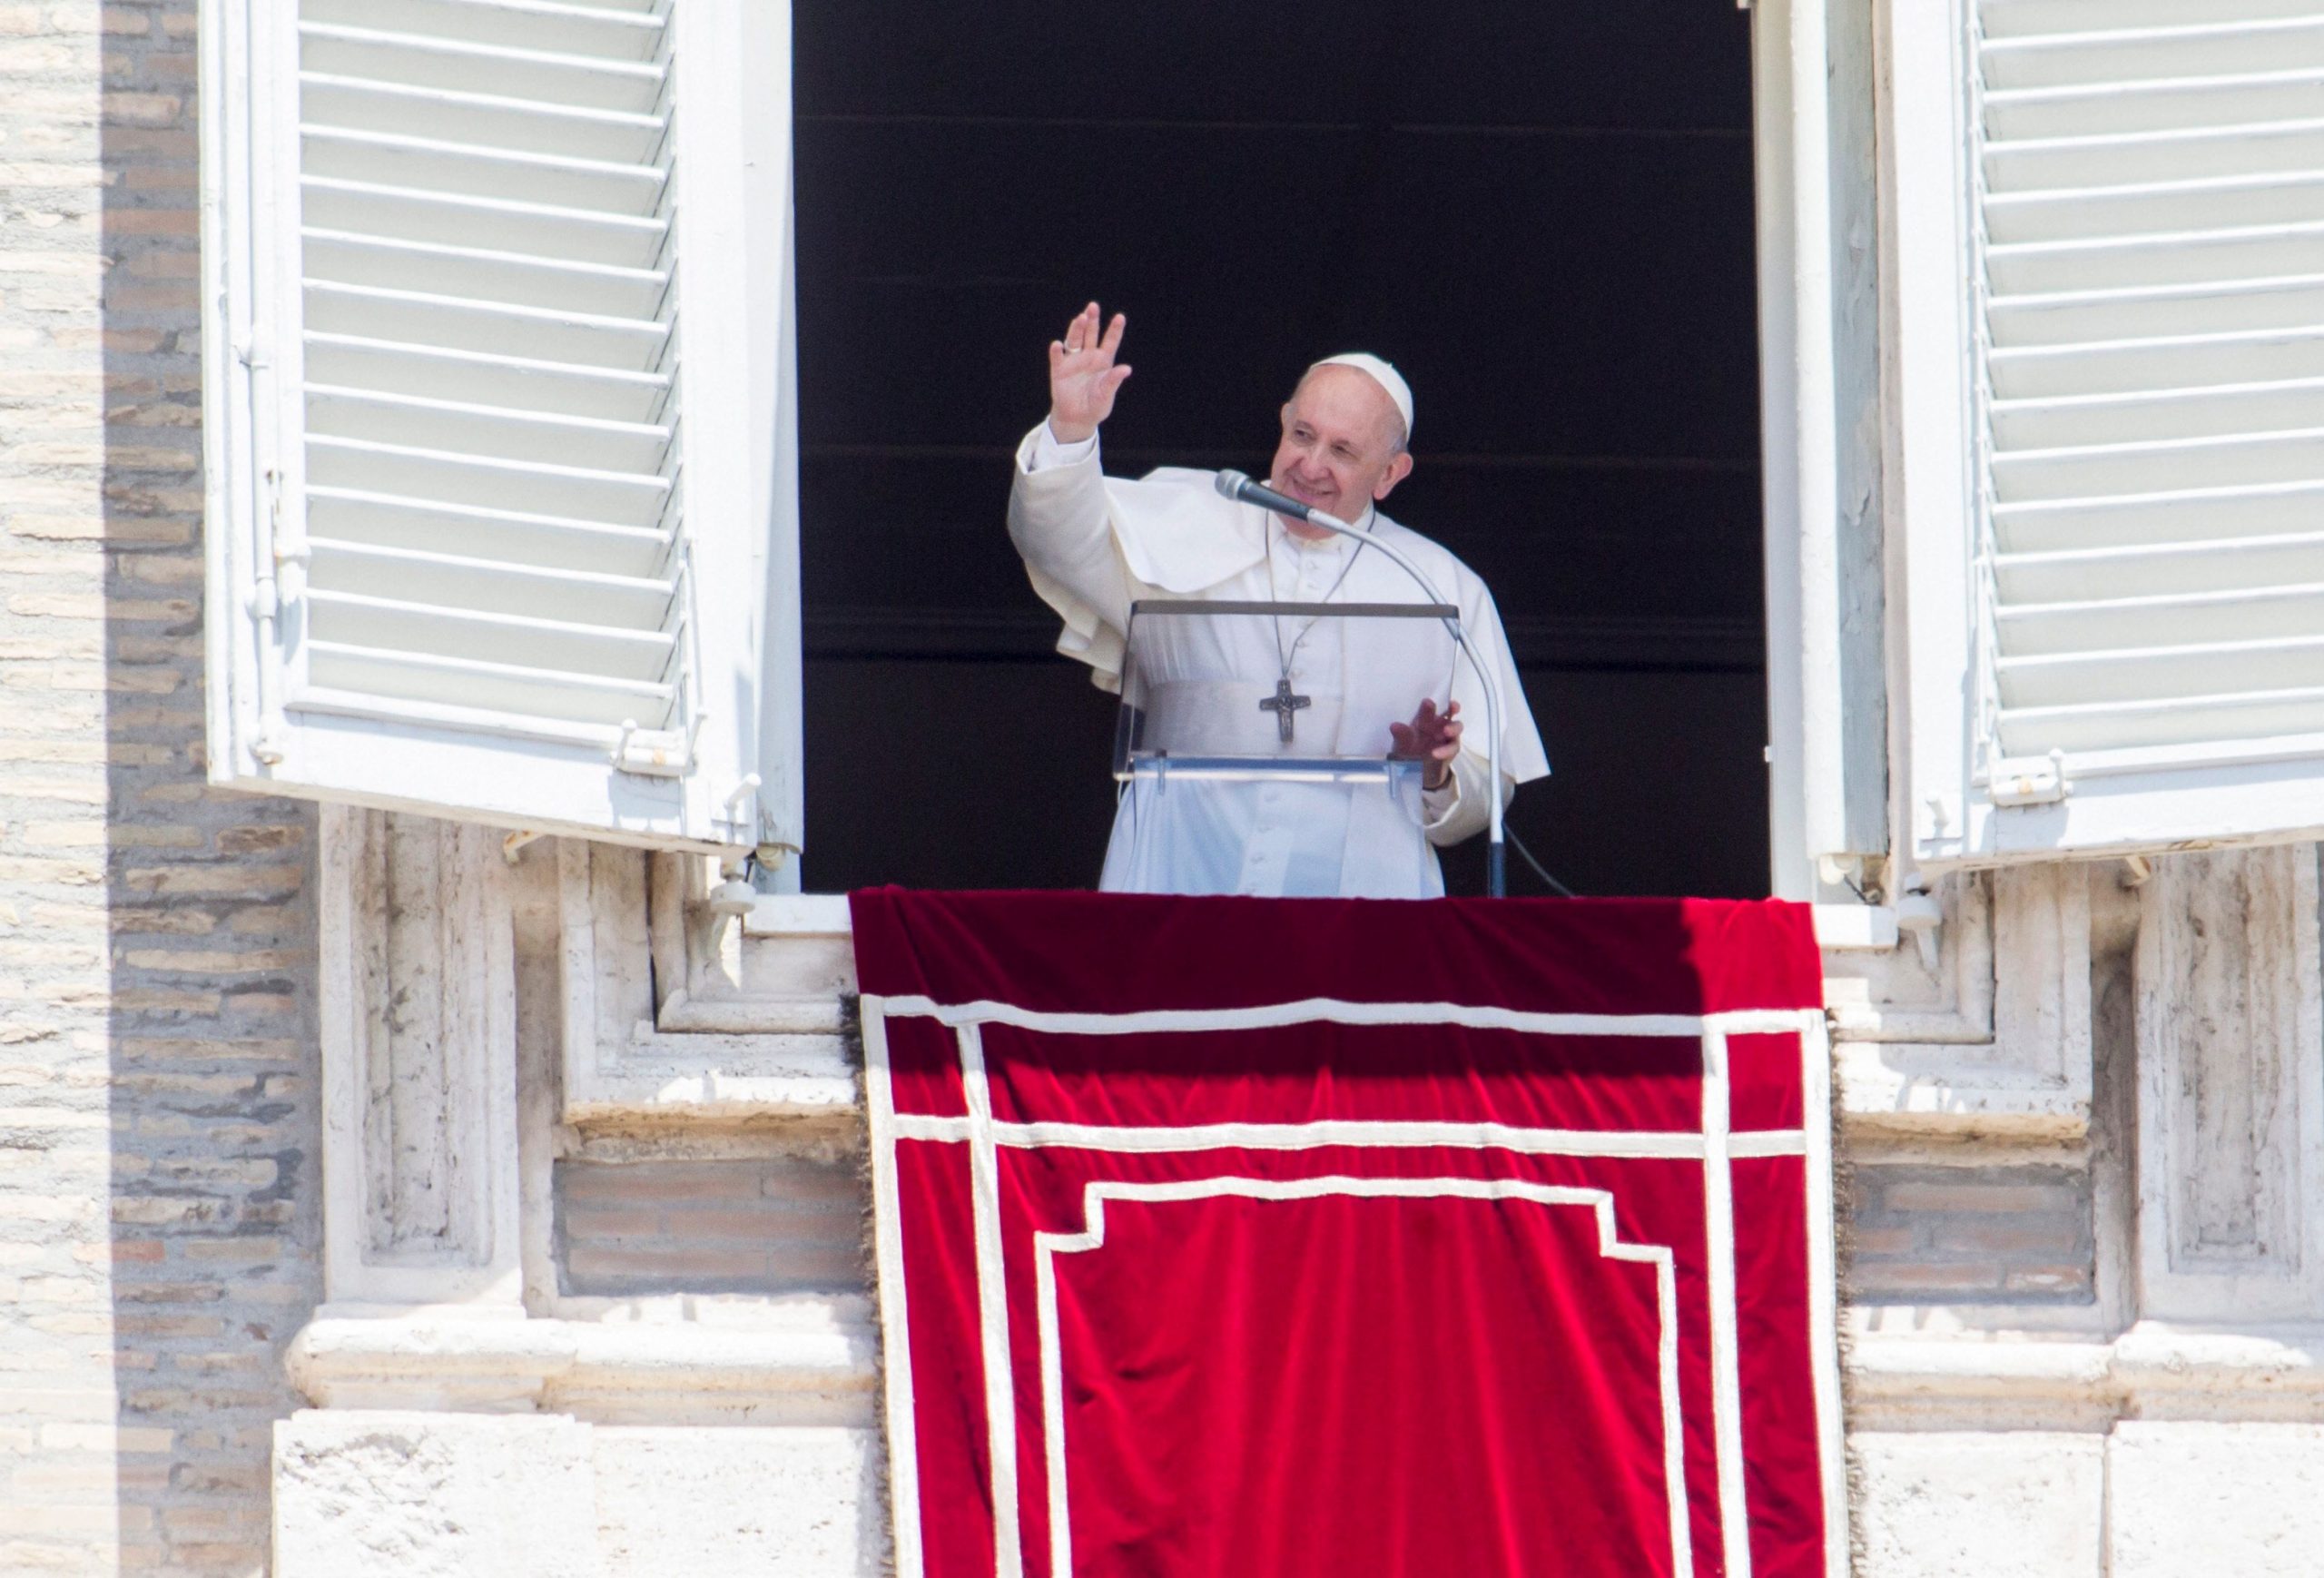 Pope Francis had breakfast, read newspaper, got up to walk after surgery